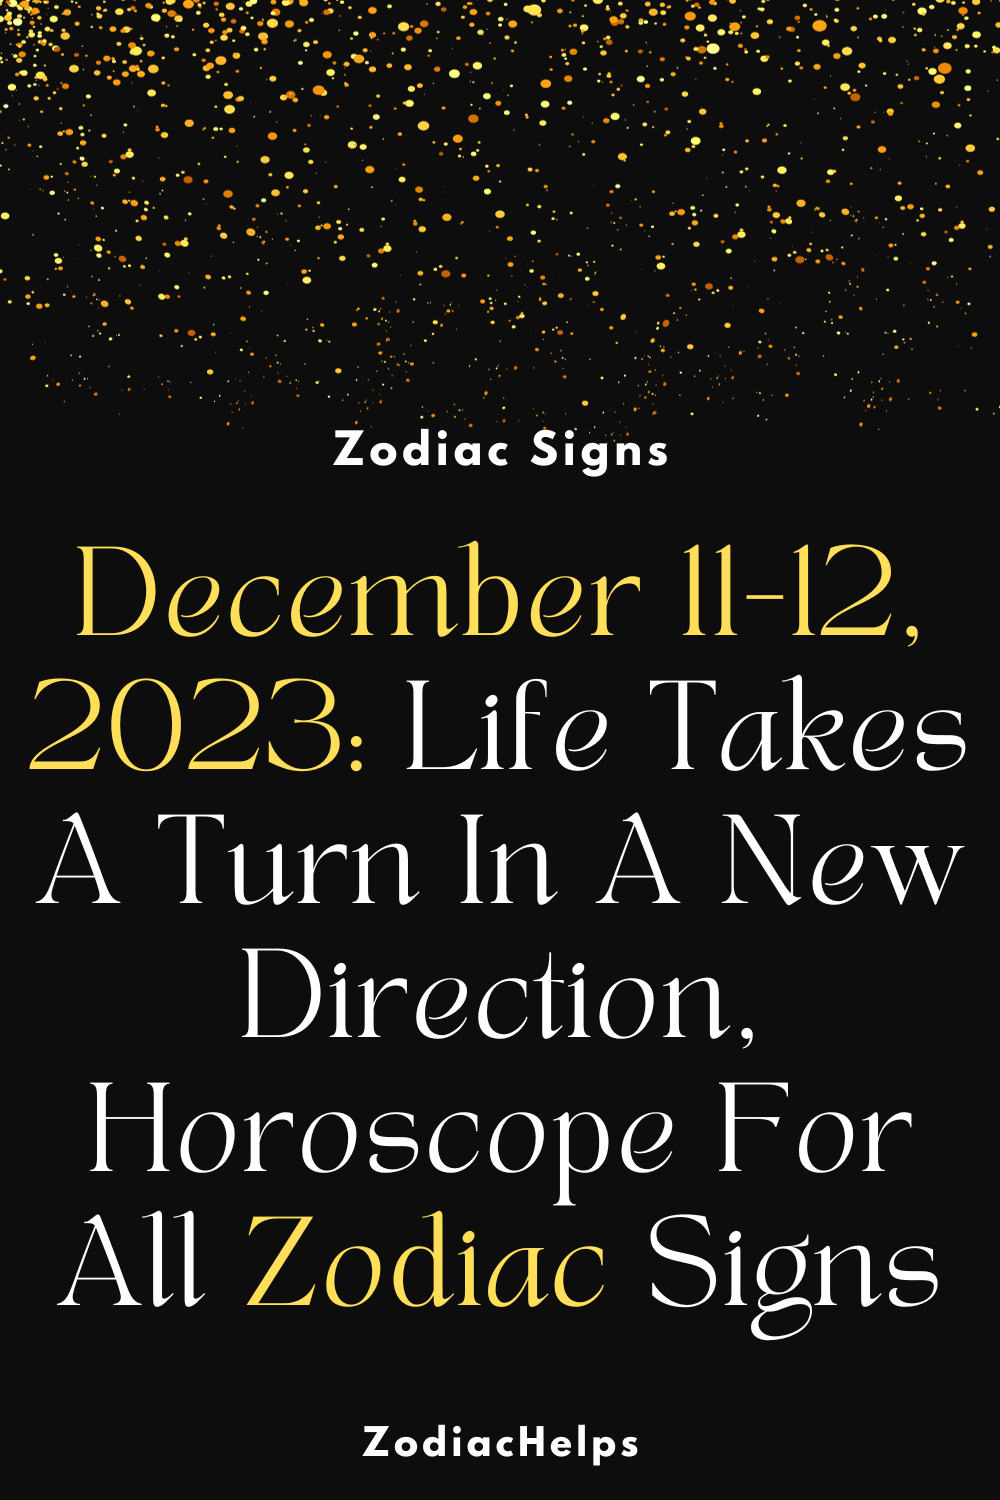 December 11-12, 2023 Life Takes A Turn In A New Direction, Horoscope For All Zodiac Signs